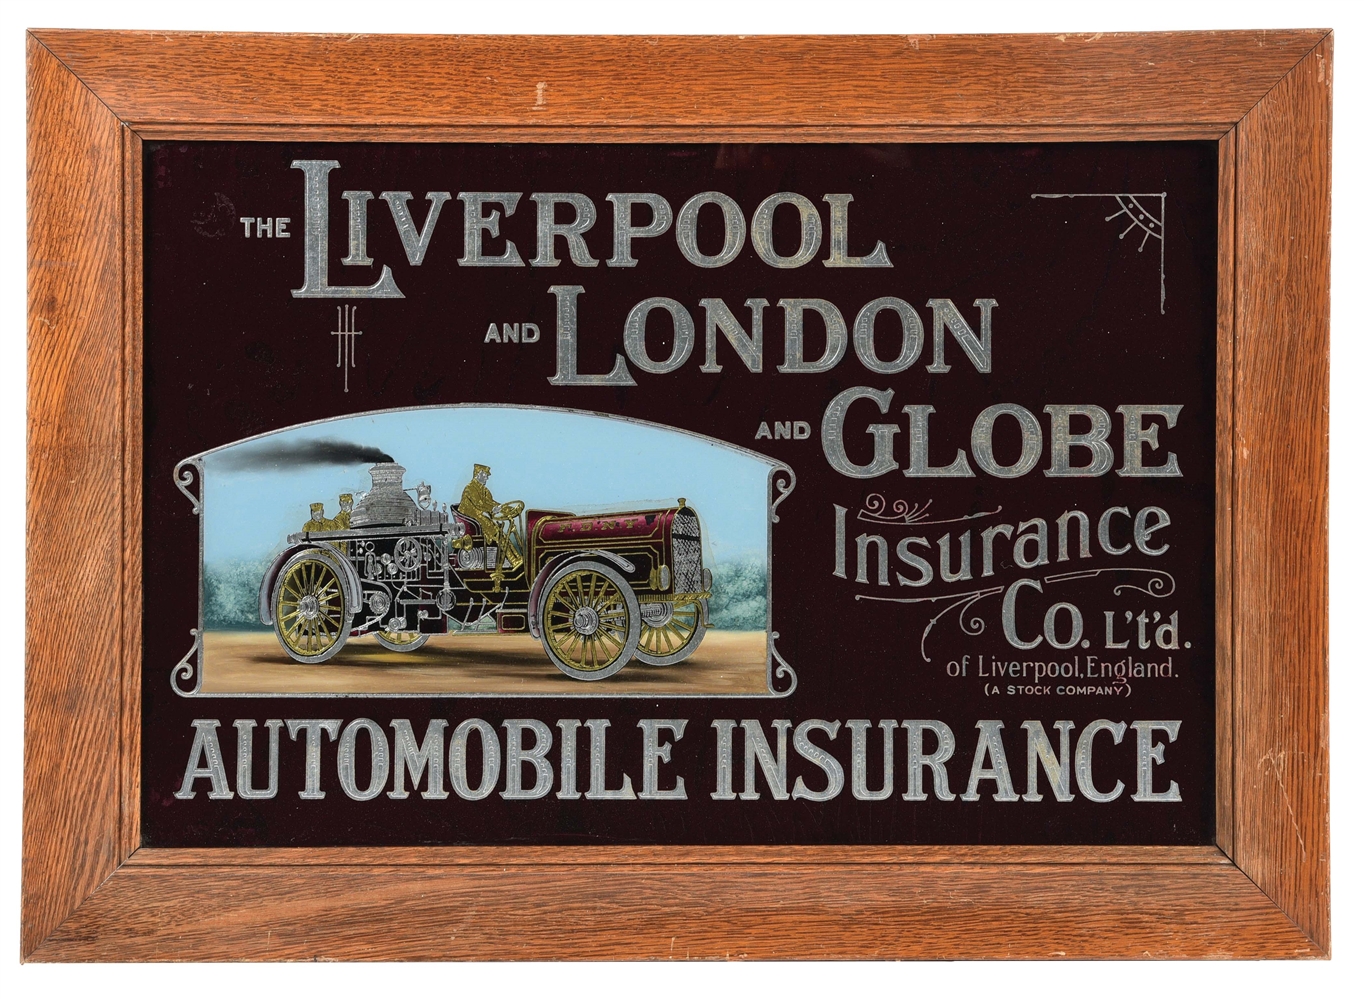 REVERSE ON GLASS "LIVERPOOL, LONDON, GLOBE INSURANCE" SIGN W/ EARLY CAR GRAPHIC.